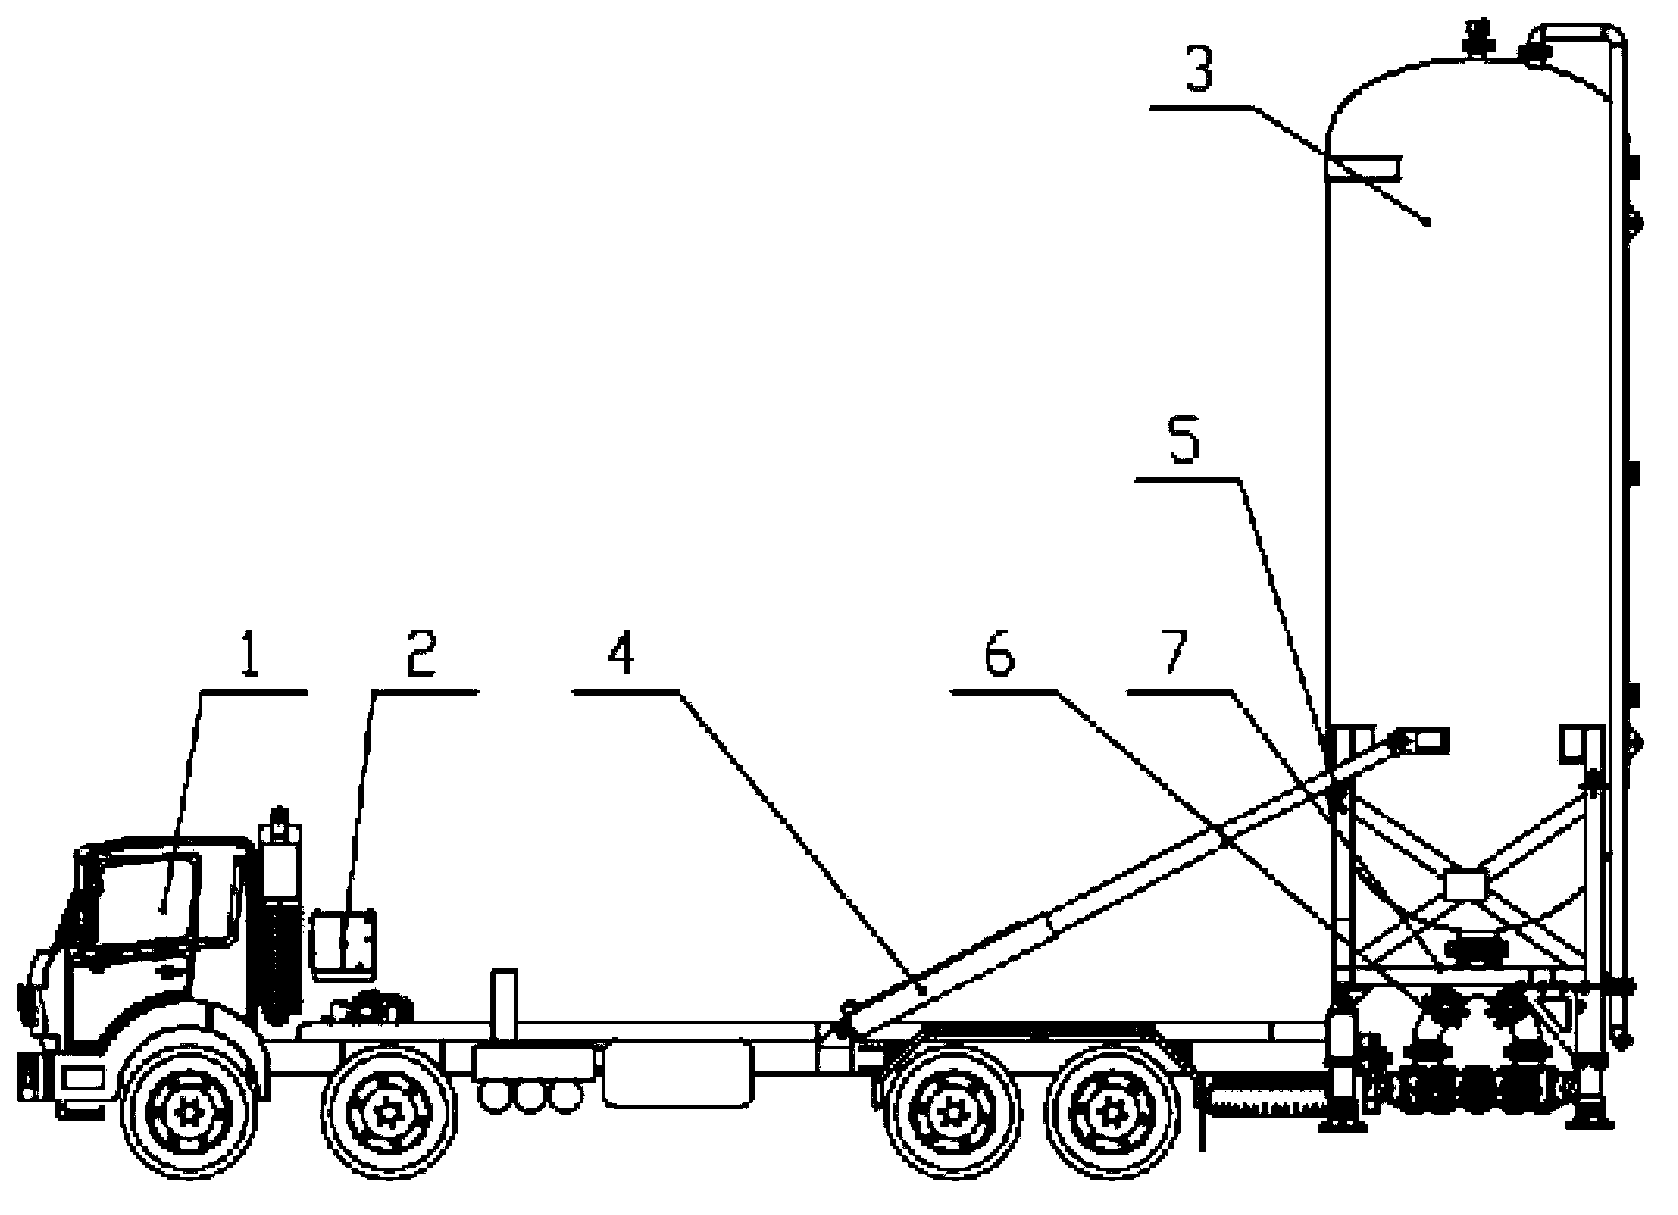 Fracturing sand mixing device